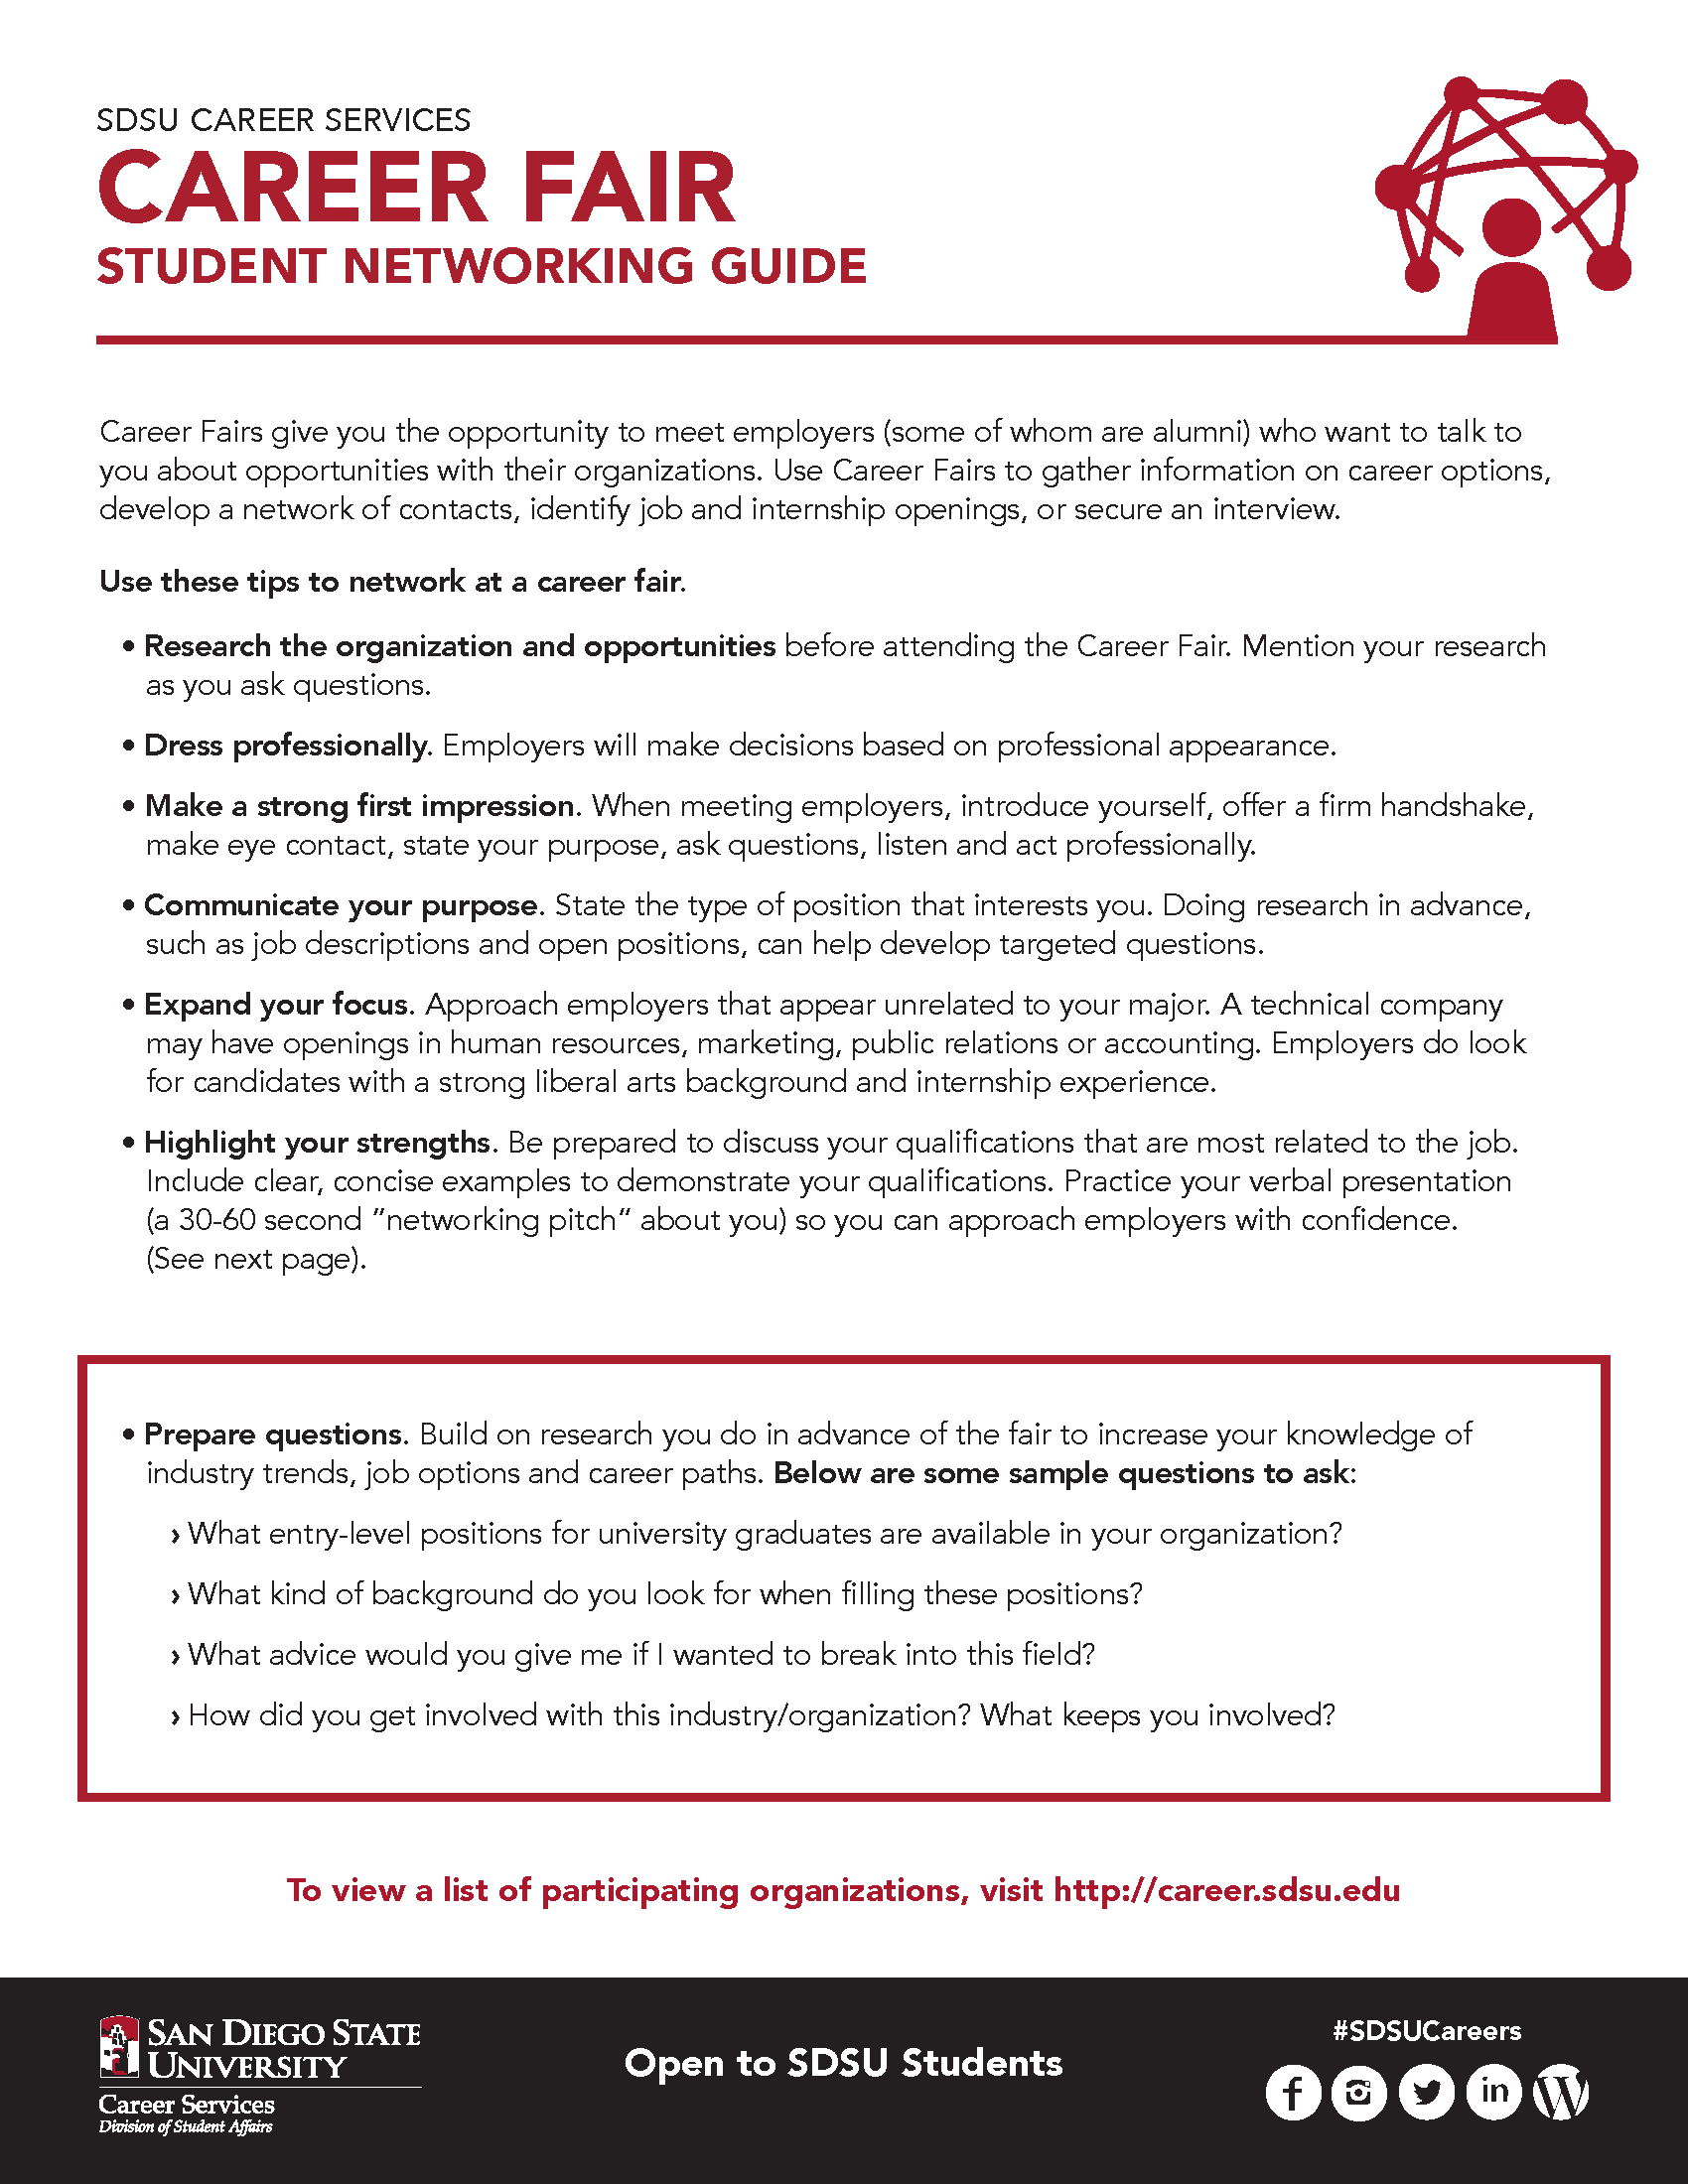 SDSU Career Fair Student Networking Guide page 1